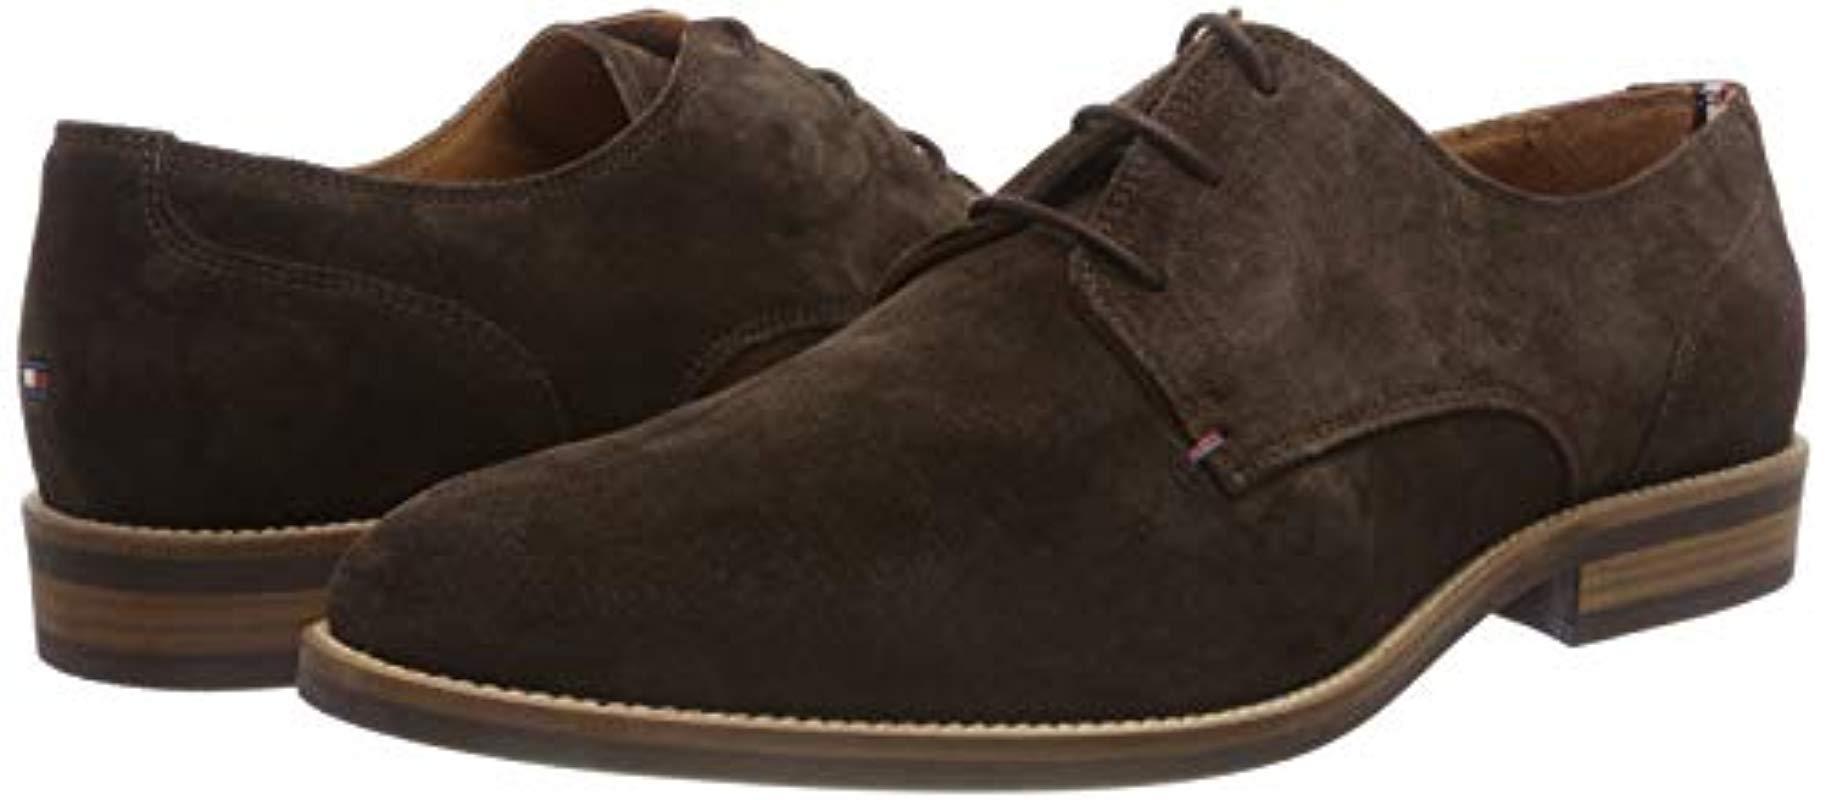 Tommy Hilfiger Daytona 1b Mens Coffee Bean Suede Casual Shoes